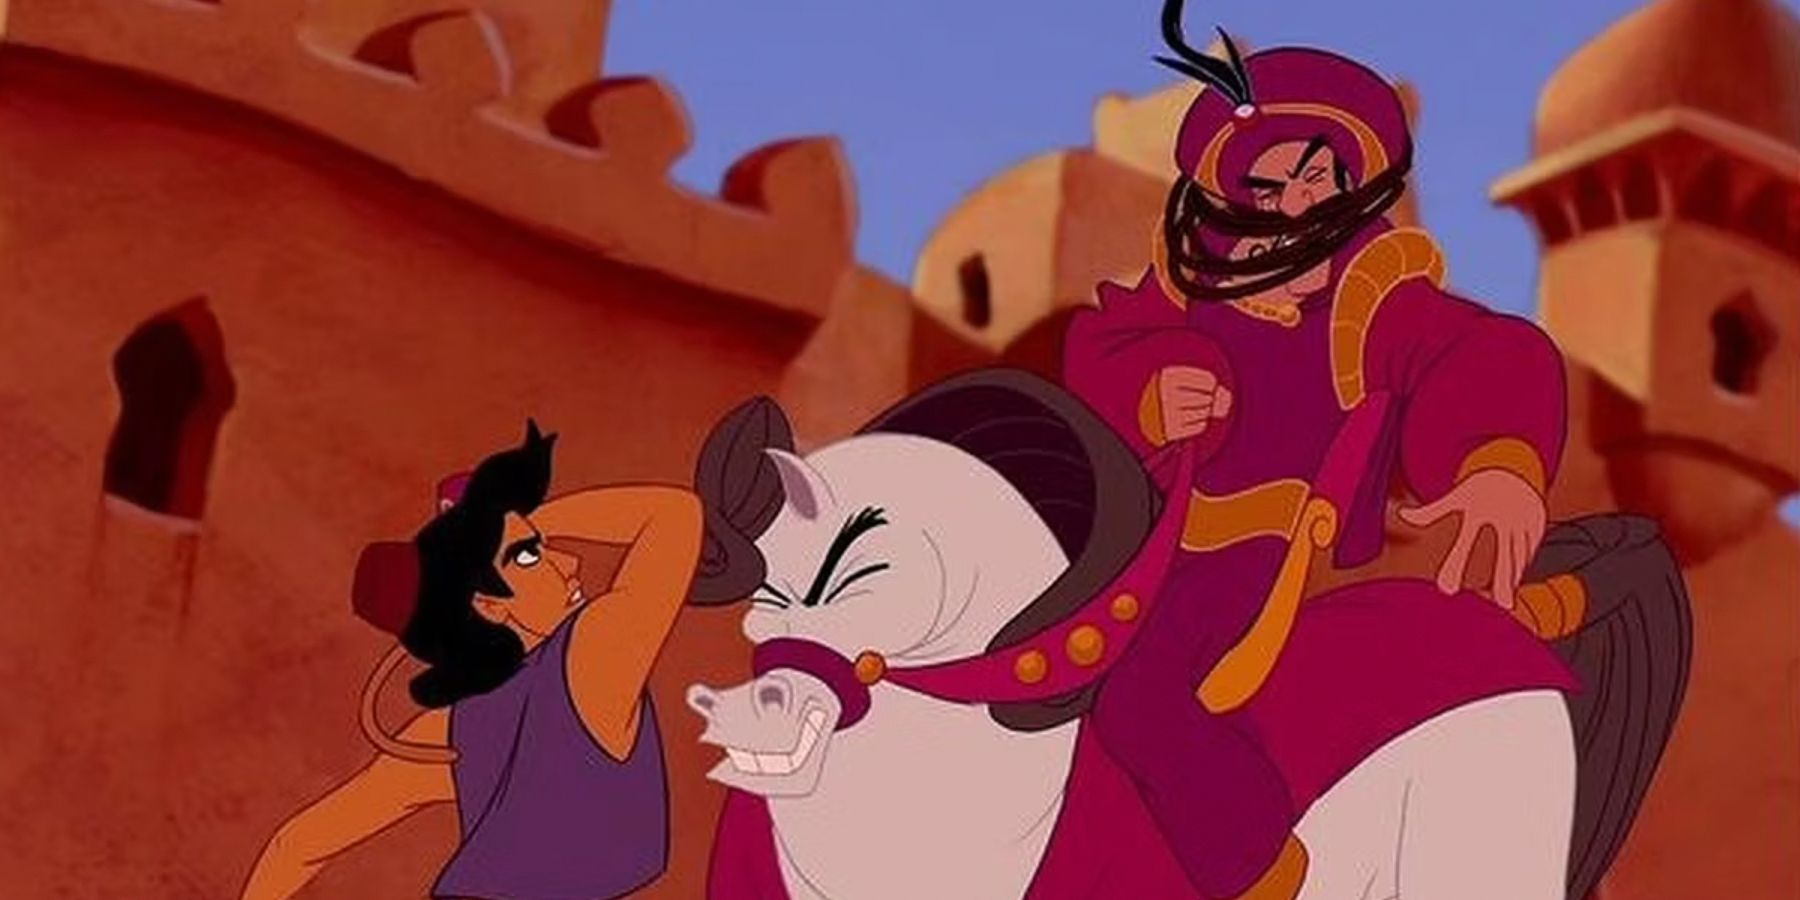 Aladdin throwing something at a guard in the animated movie